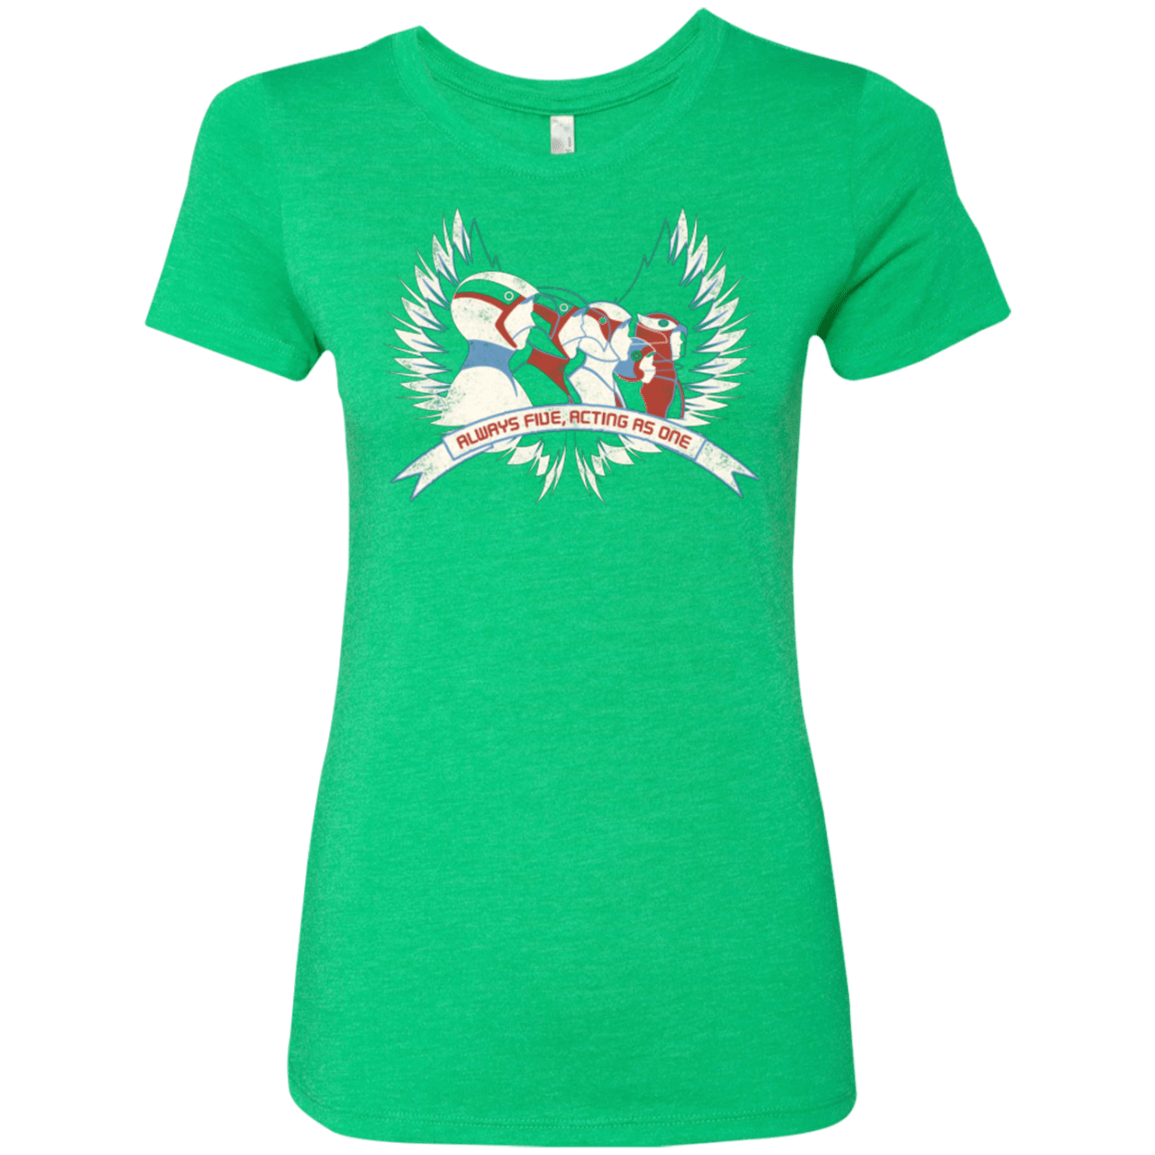 T-Shirts Envy / Small Always Five Acting As One Women's Triblend T-Shirt